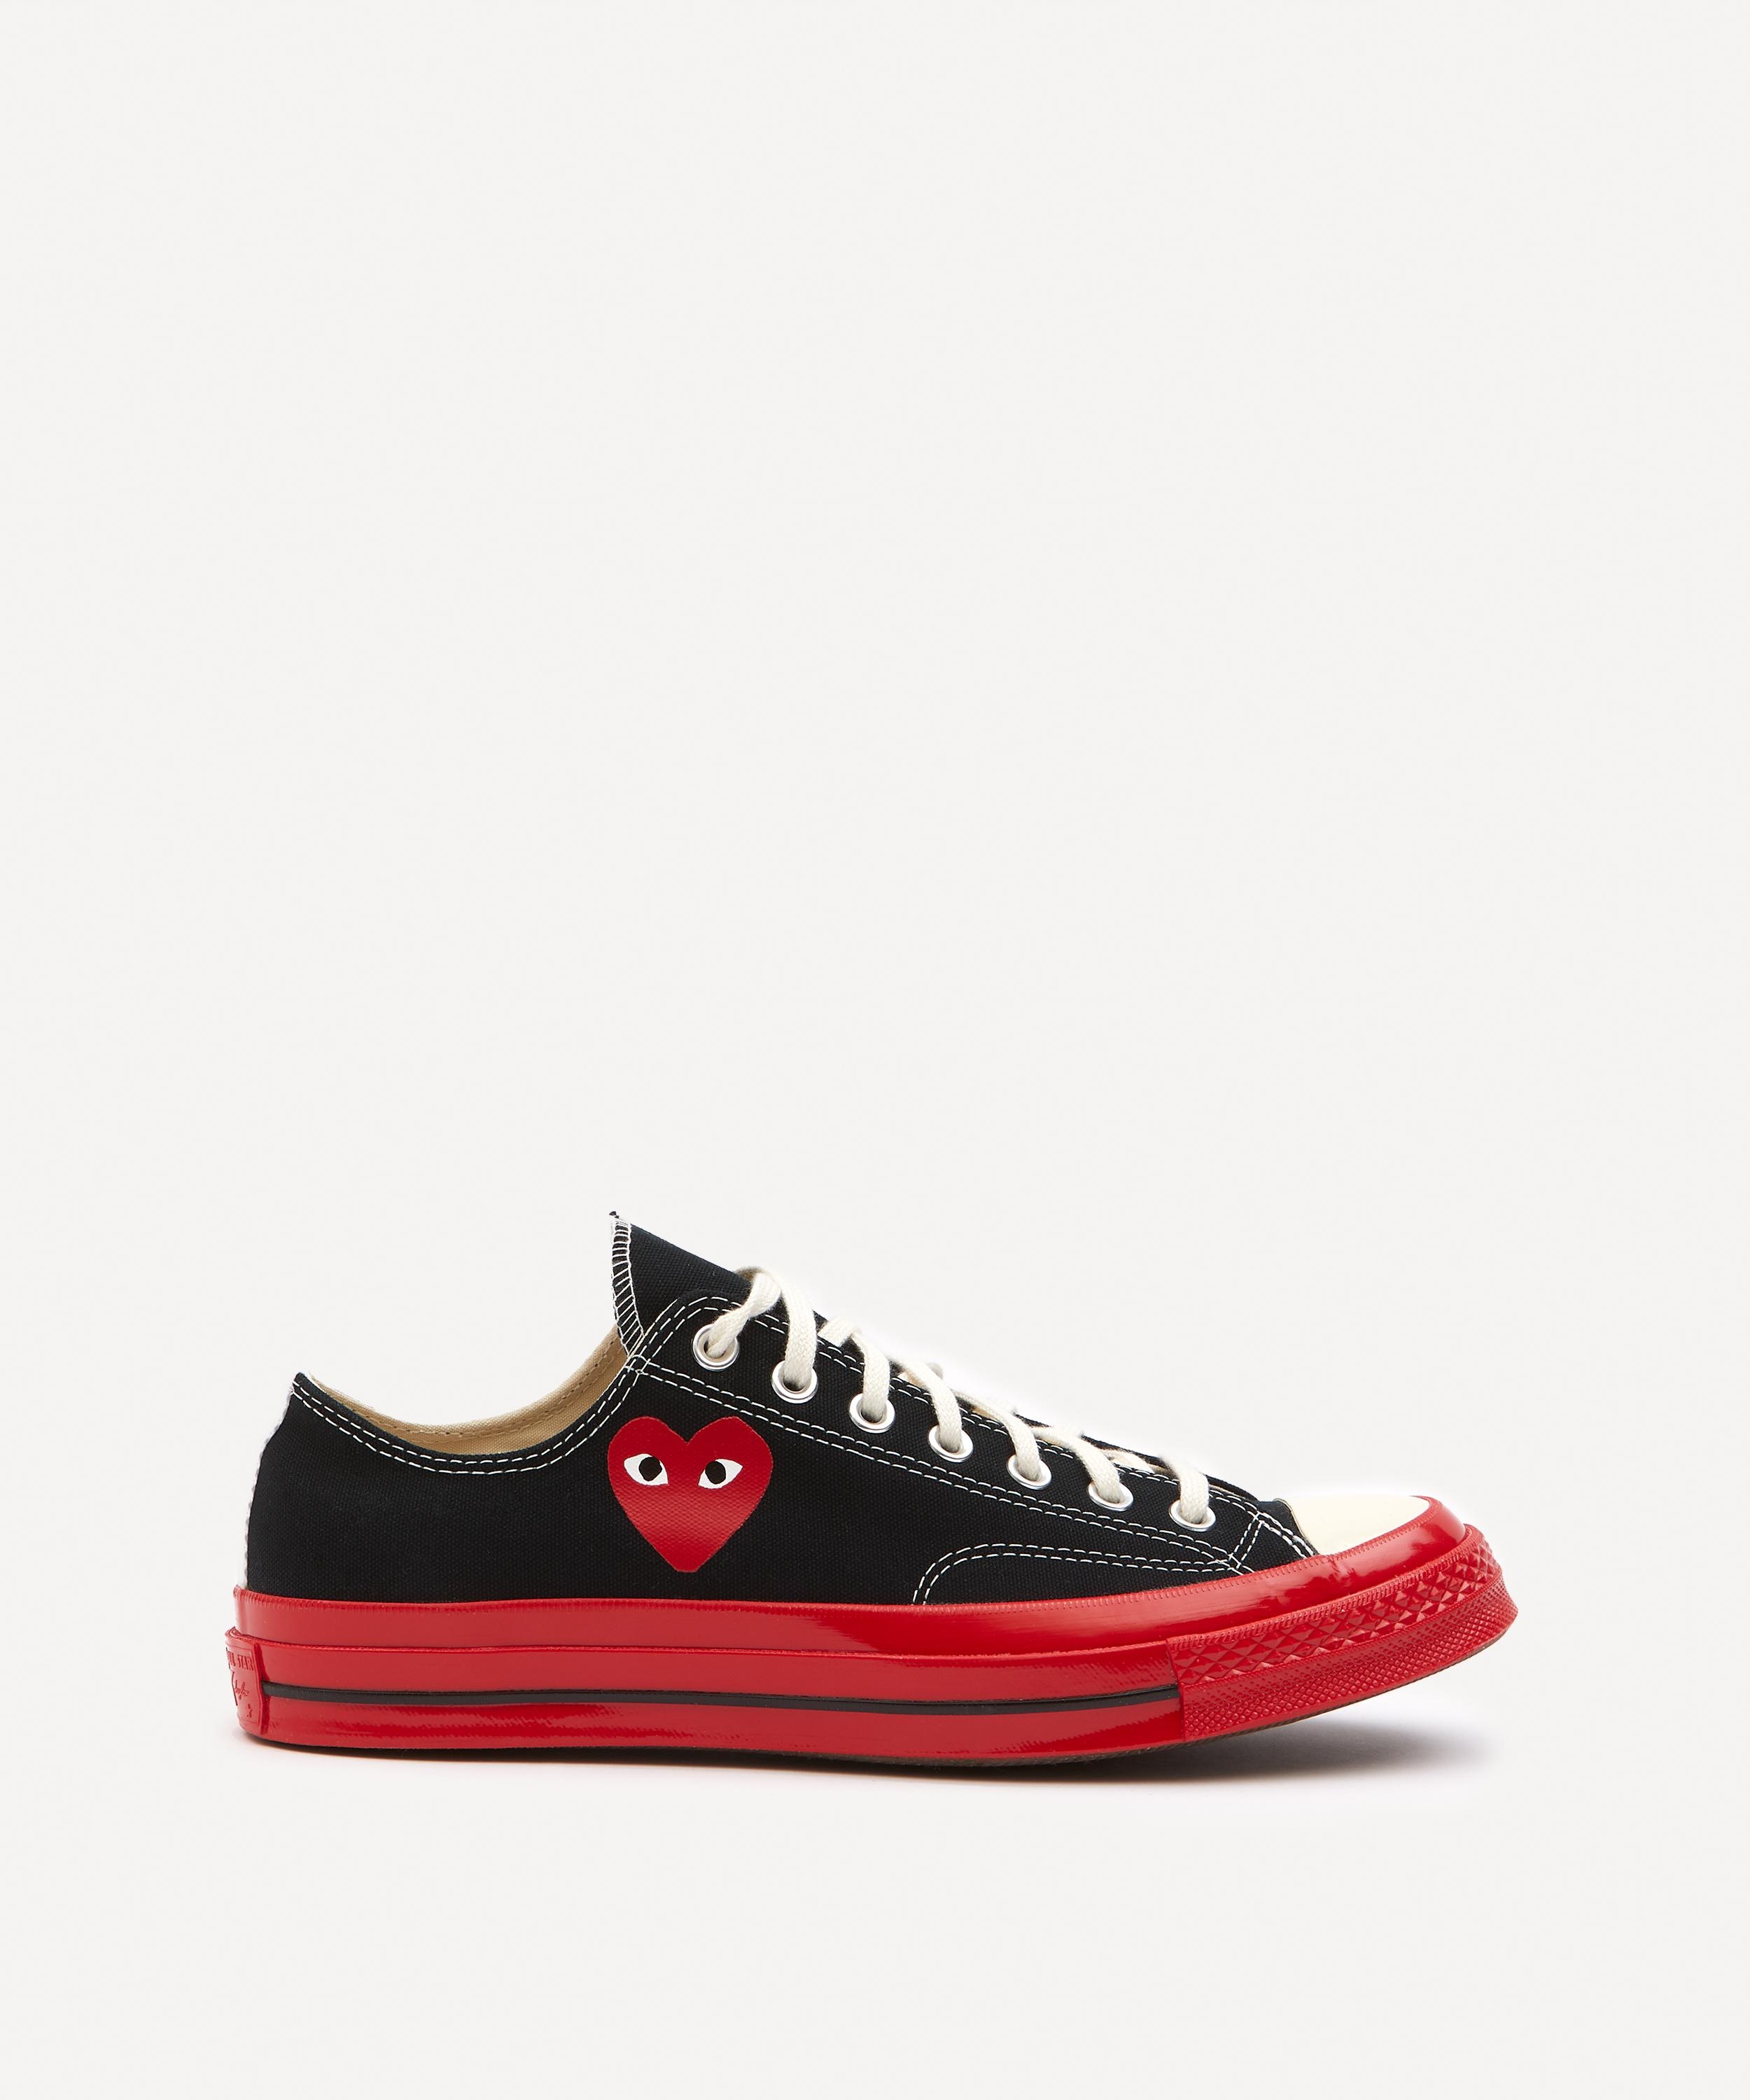 x Converse 70s Canvas Low-Top Red Sole Trainers - 6